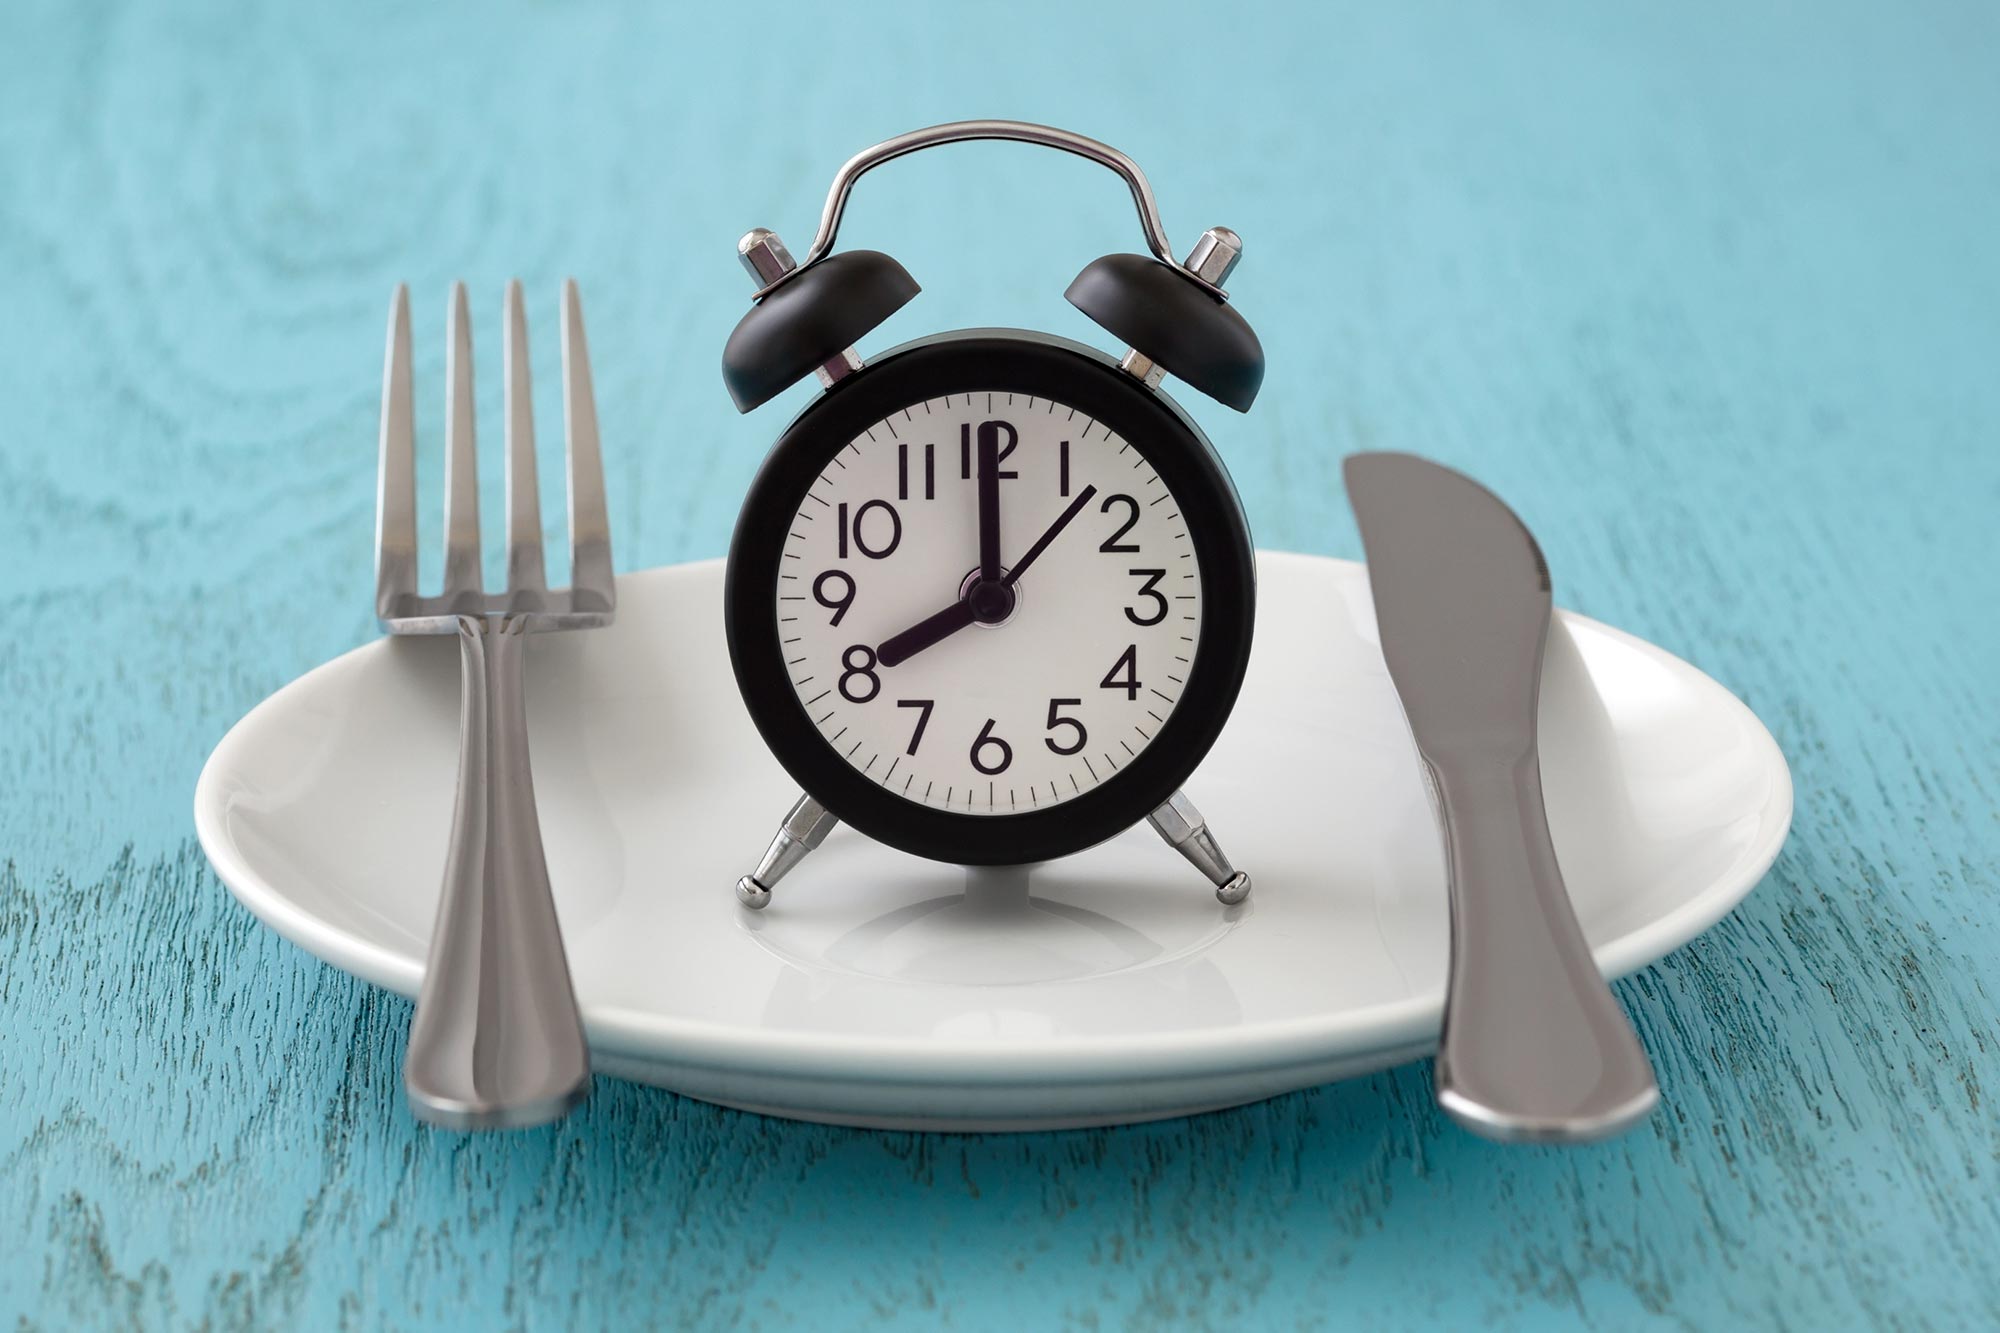 Intermittent Fasting Completely Reverses Type 2 Diabetes in Study